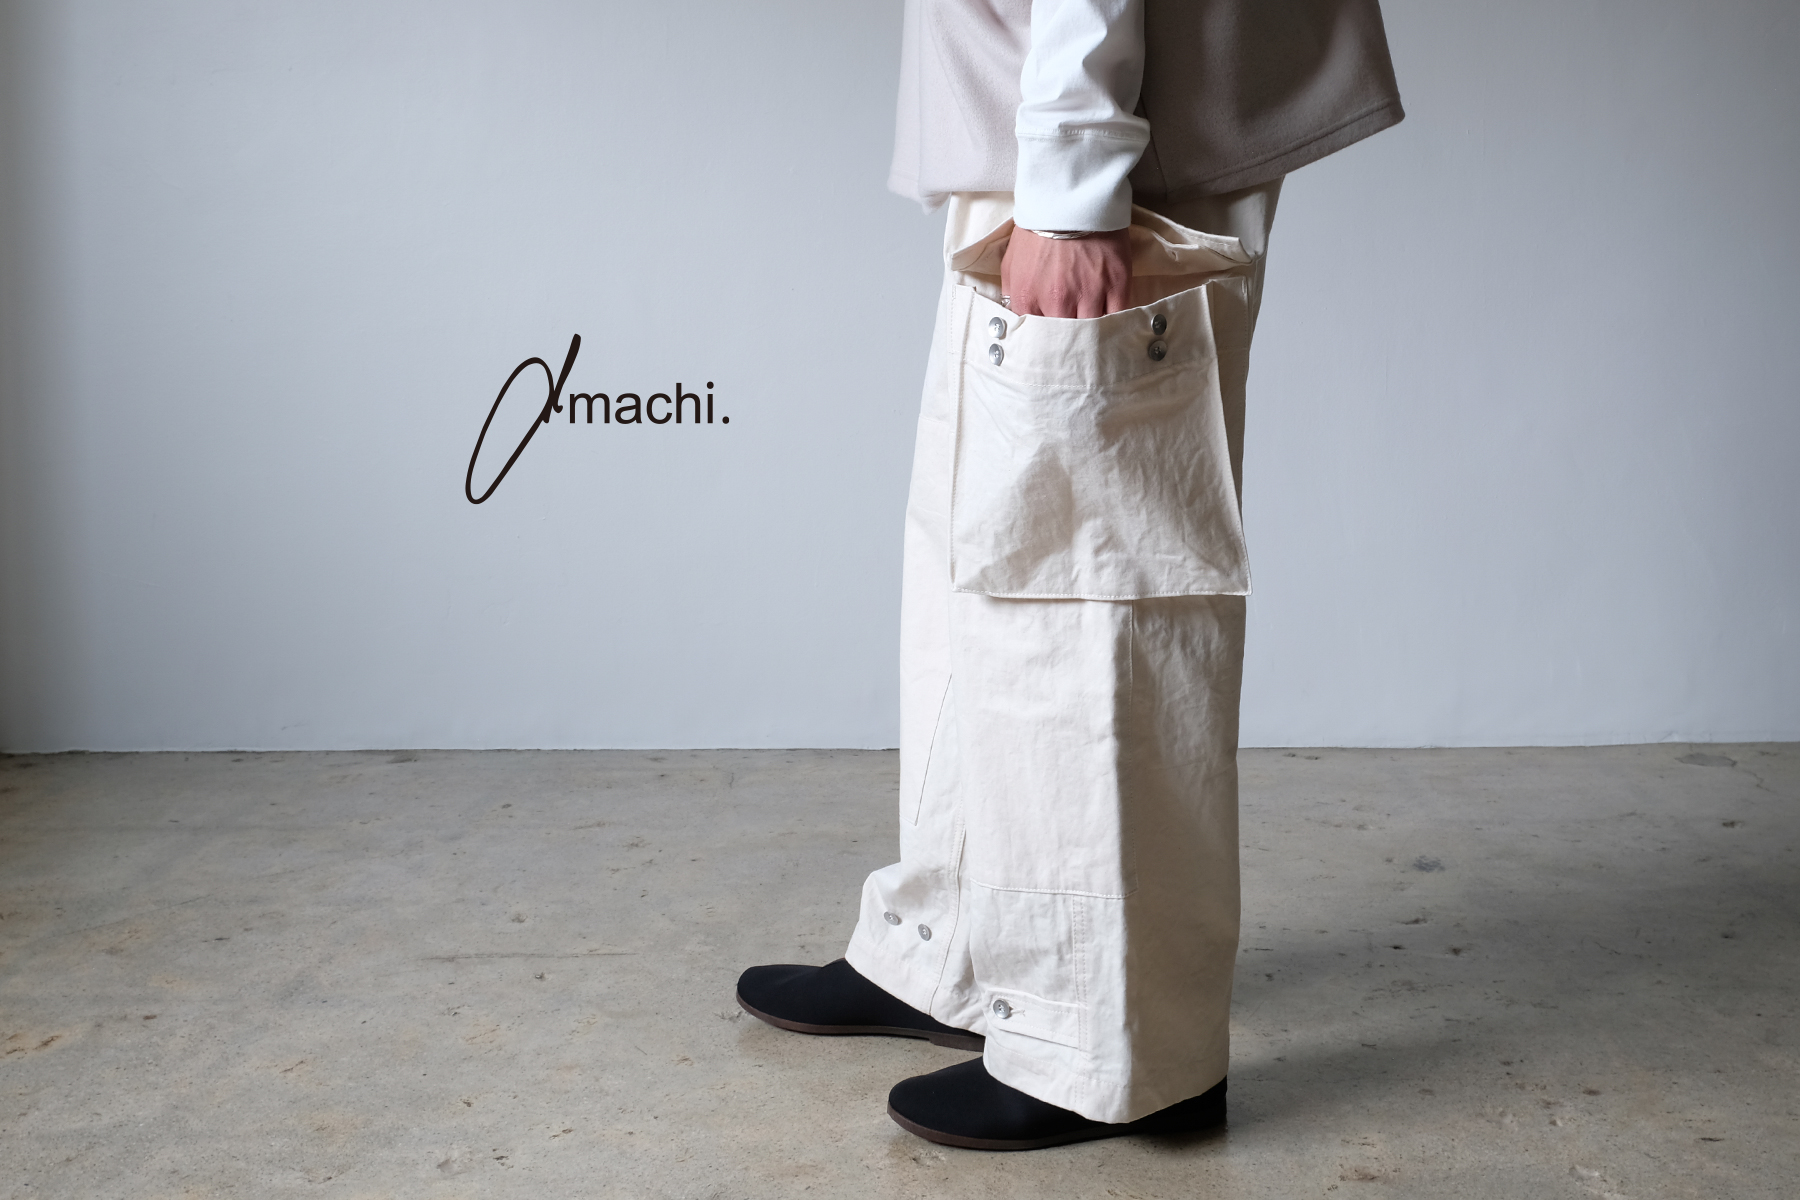 amachi.｜アマチ Collection 007 “Notion of Forms”